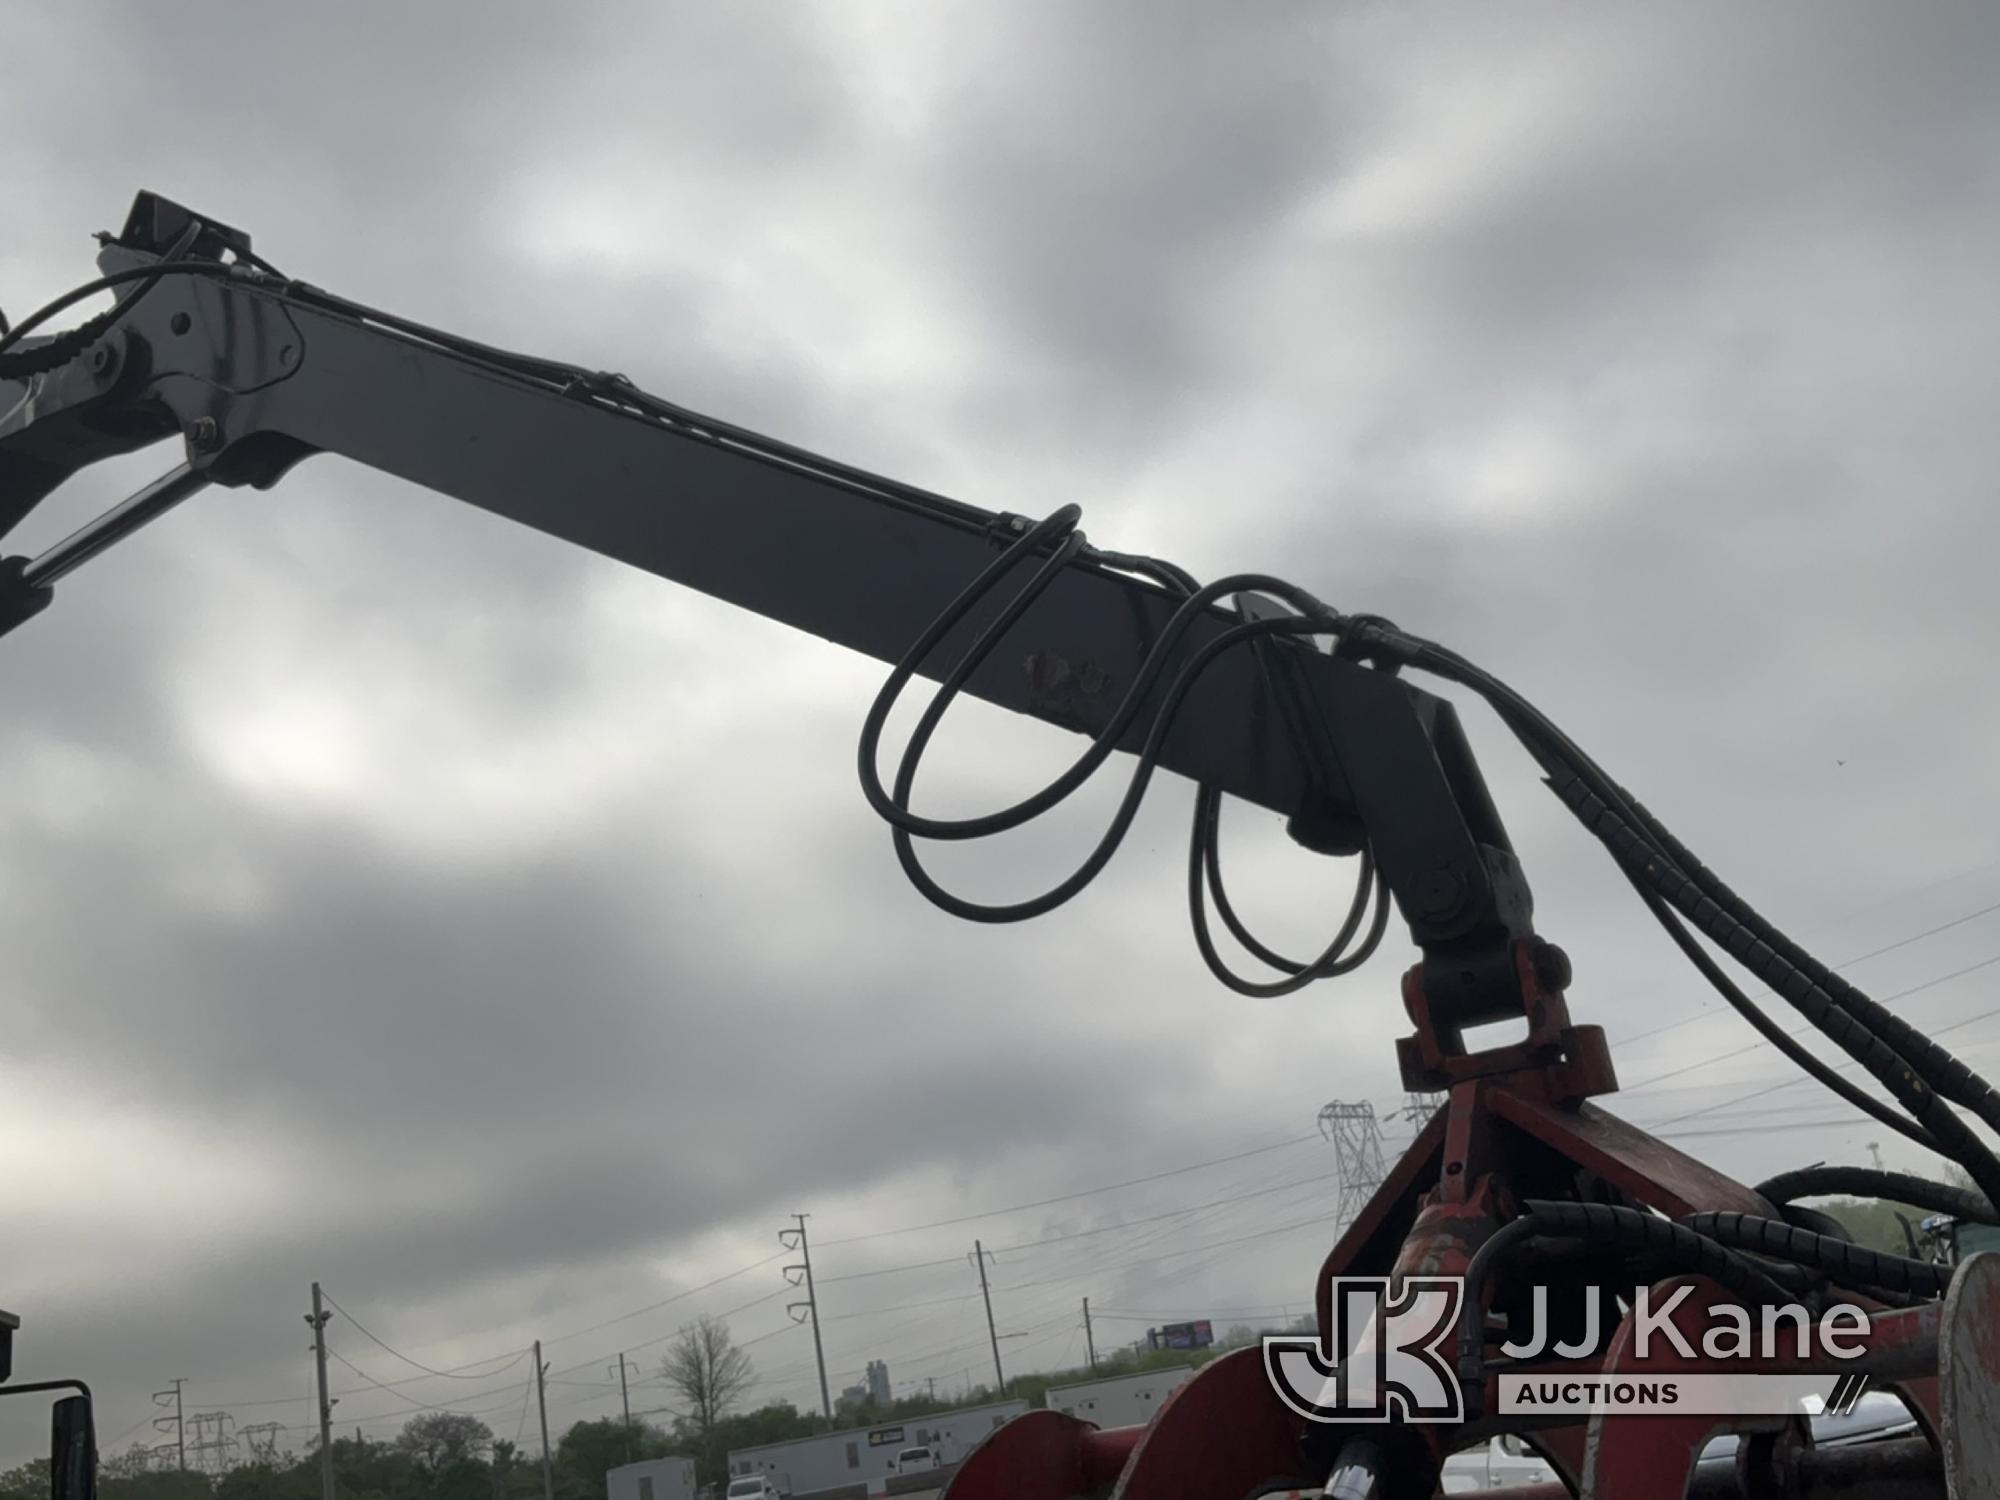 (Plymouth Meeting, PA) Prentice 2124, Grappleboom/Log Loader Crane mounted behind cab on 2016 Freigh